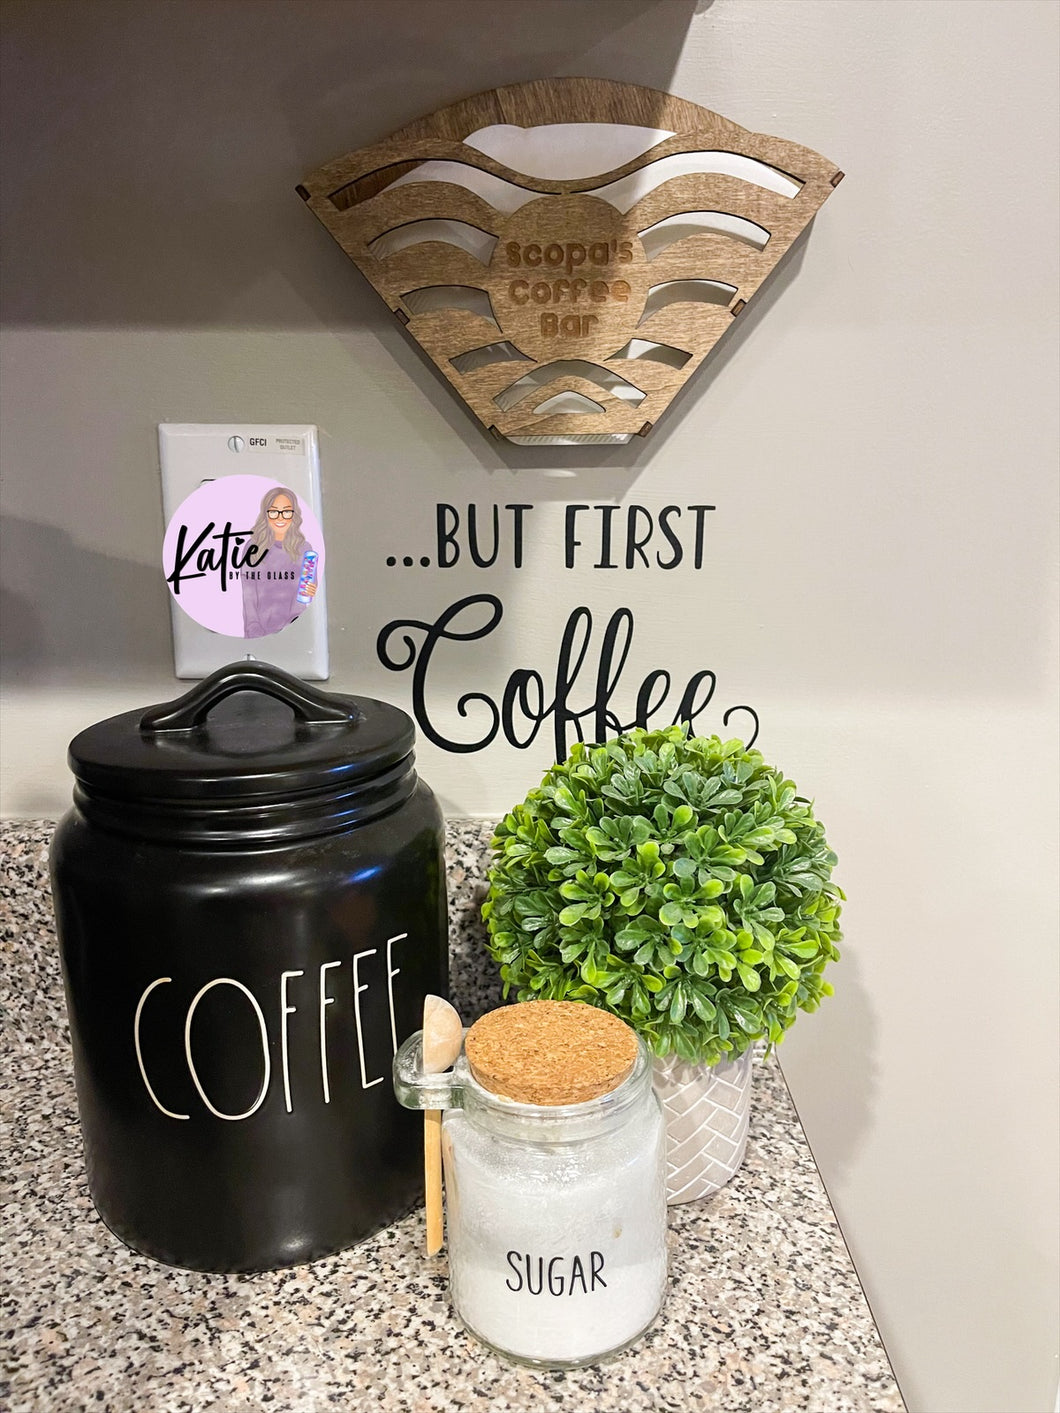 Personalized Laser Engraved Coffee Filter Holder